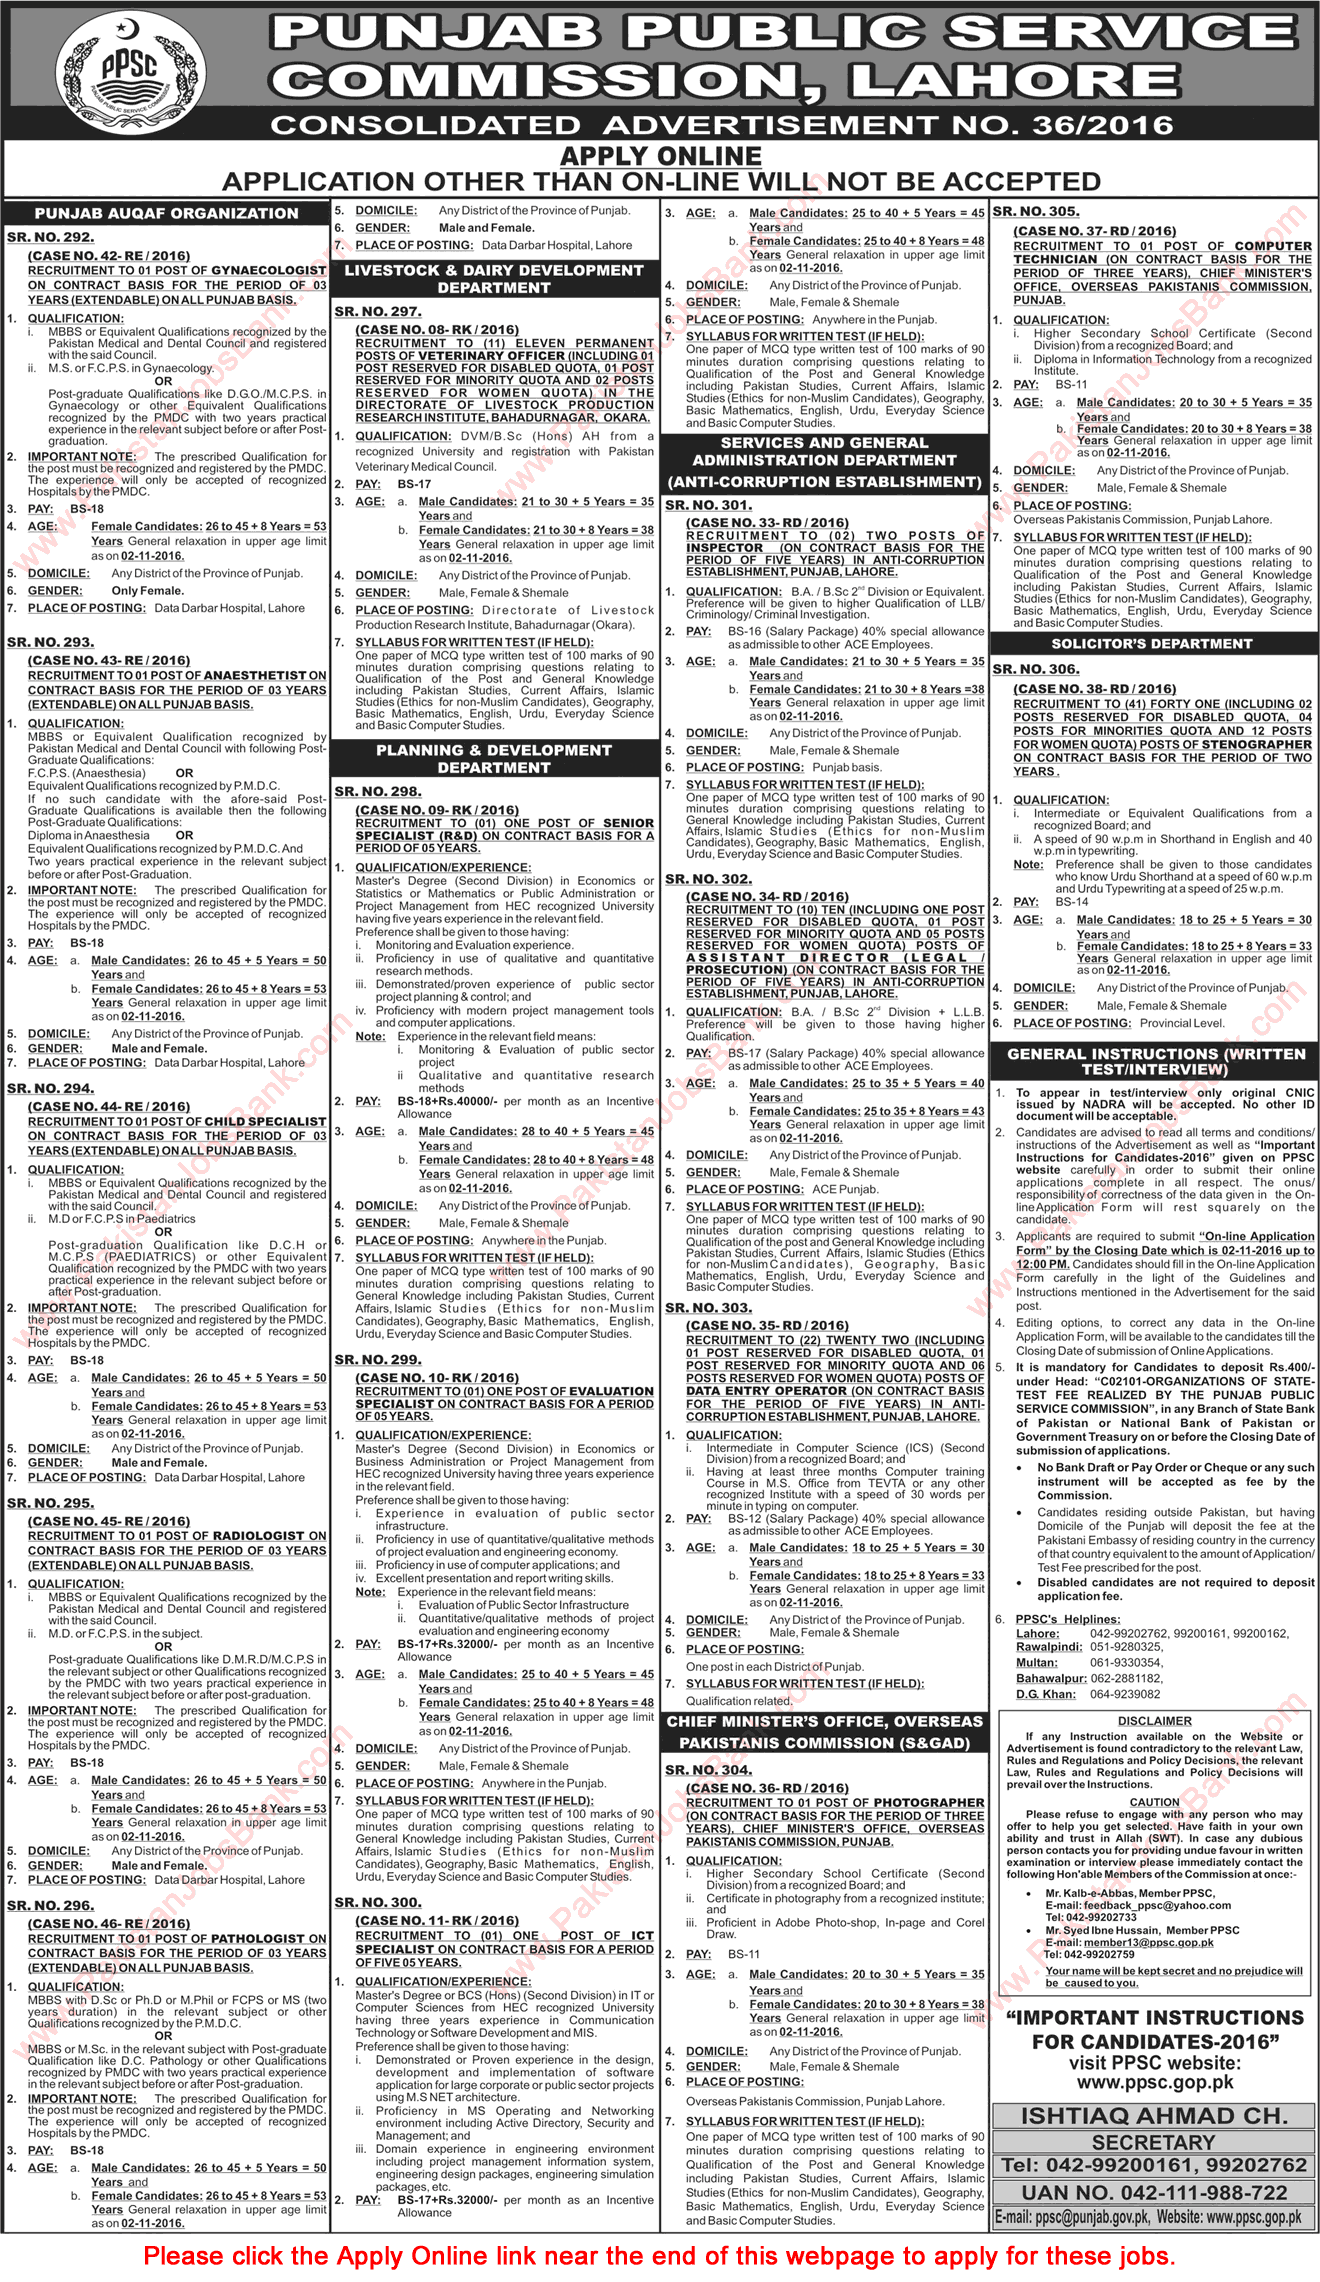 PPSC Jobs October 2016 Consolidated Advertisement No 36/2016 Apply Online Latest